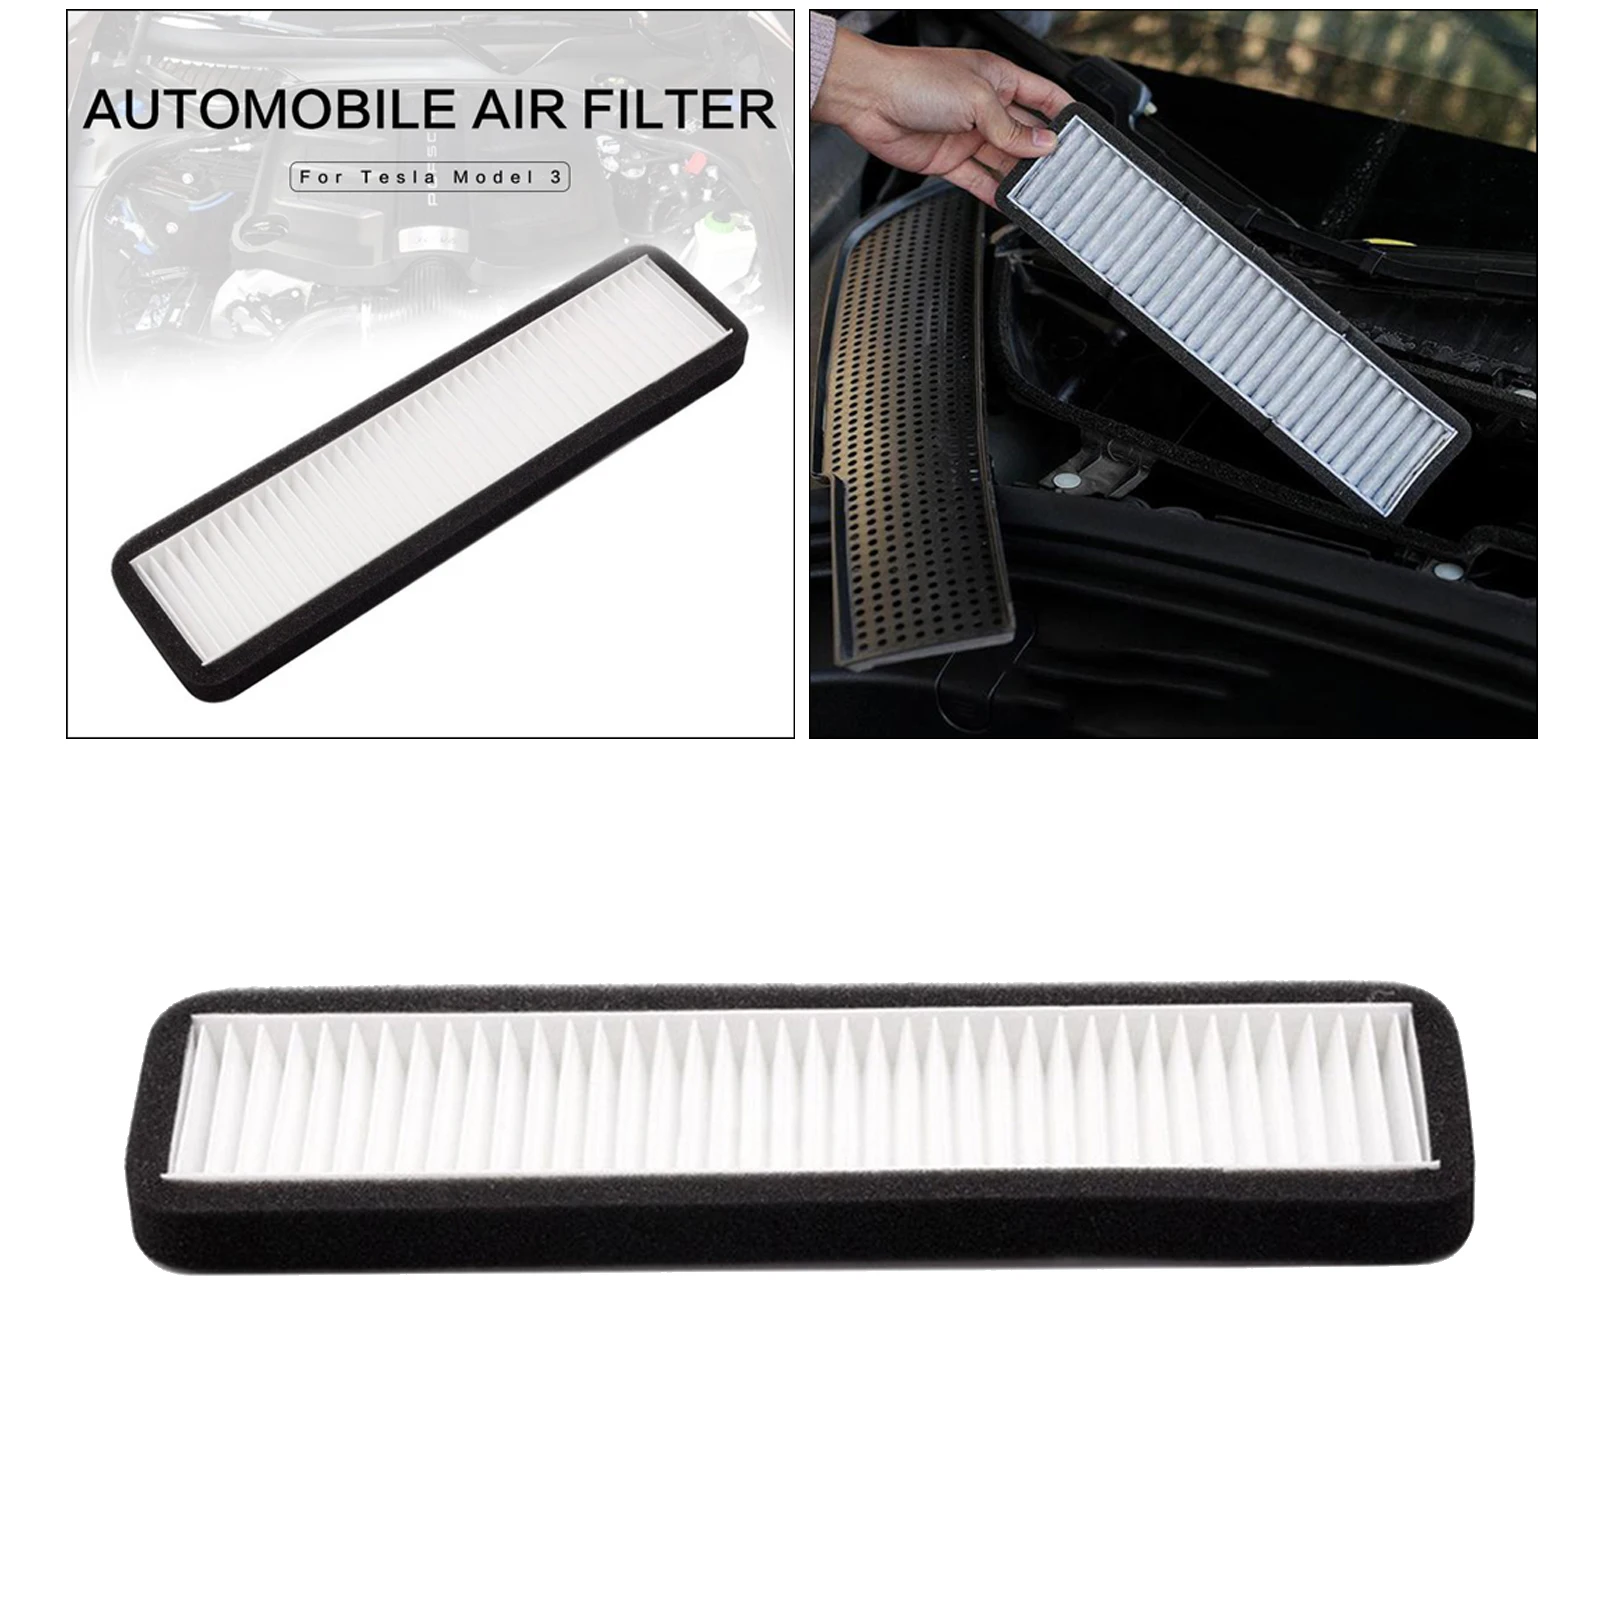 Air Conditioning Filter Replacement Effective Blocking PM2.5 For Tesla Model 3 Accessories